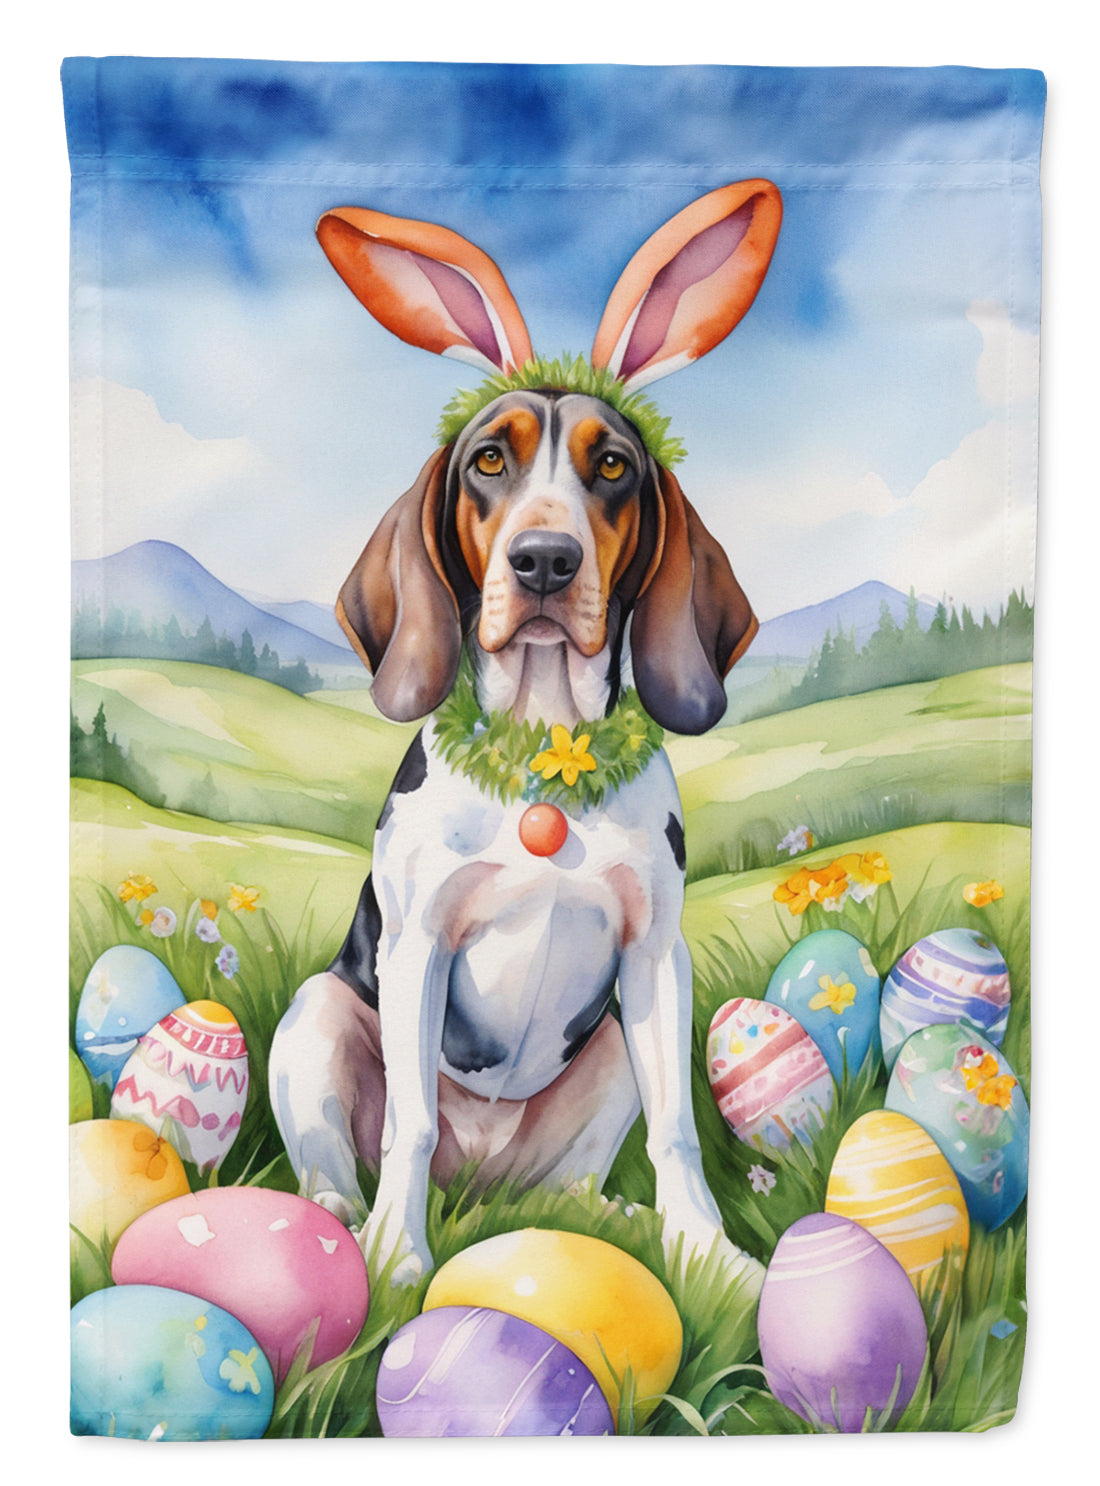 Buy this American English Coonhound Easter Egg Hunt Garden Flag